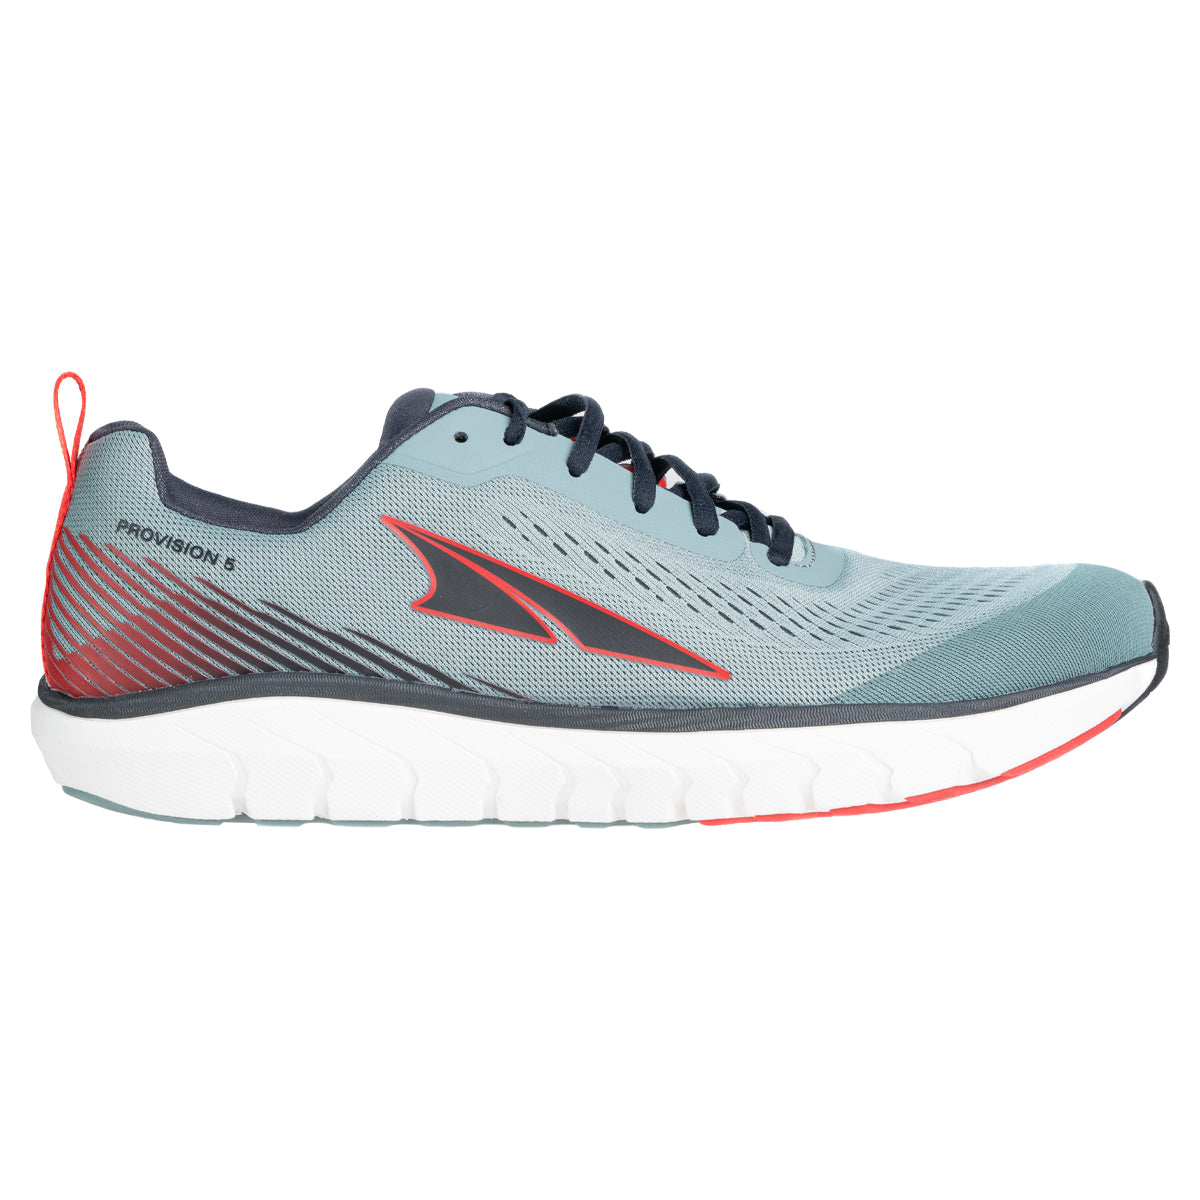 Altra Men's Provision 5 in  by GOHUNT | Altra - GOHUNT Shop